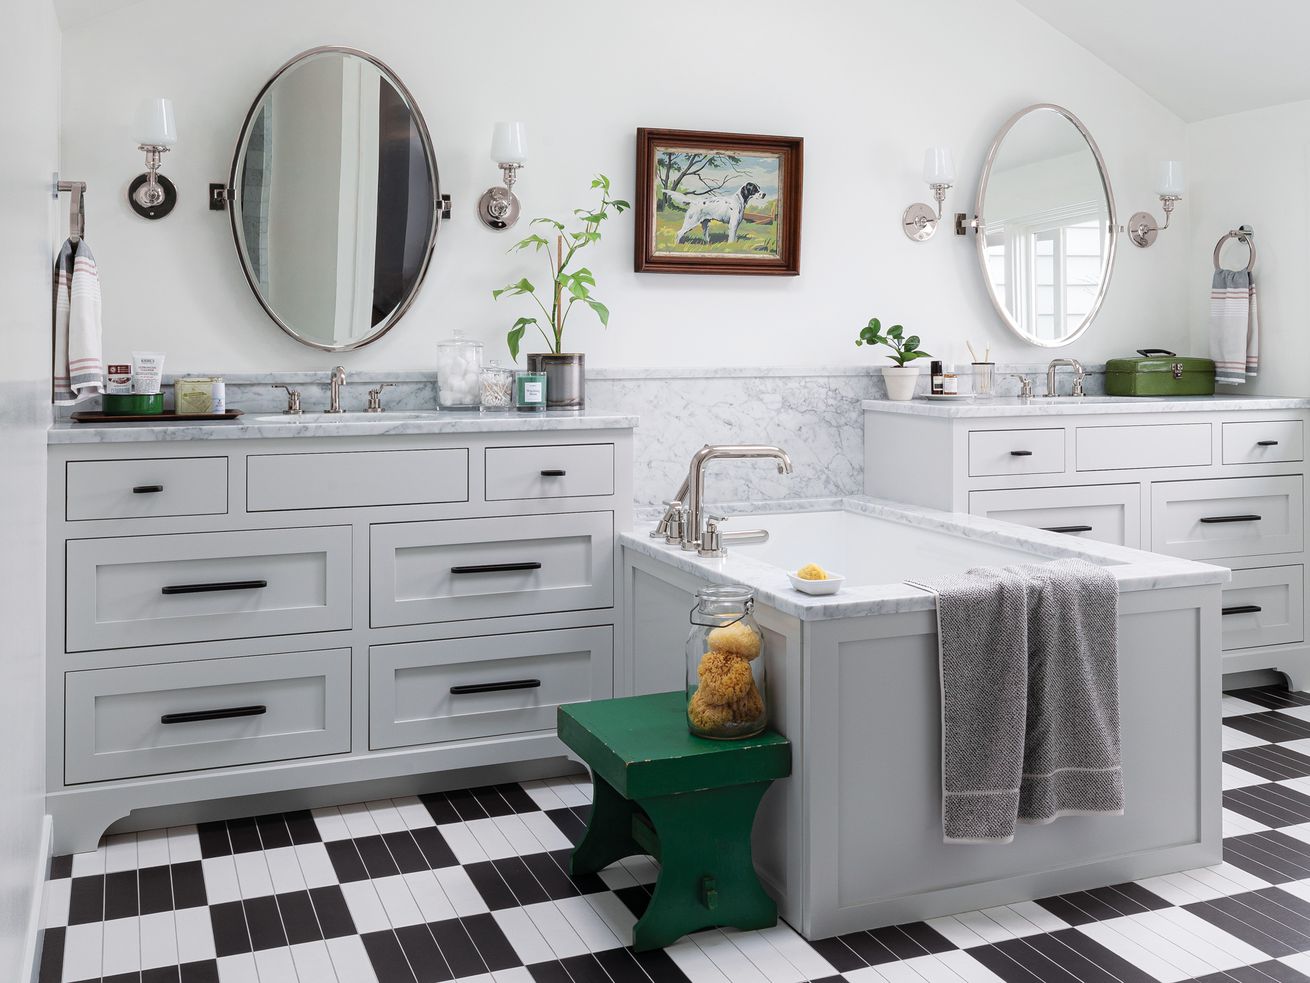 Black and white bathroom with bright green stool in the center